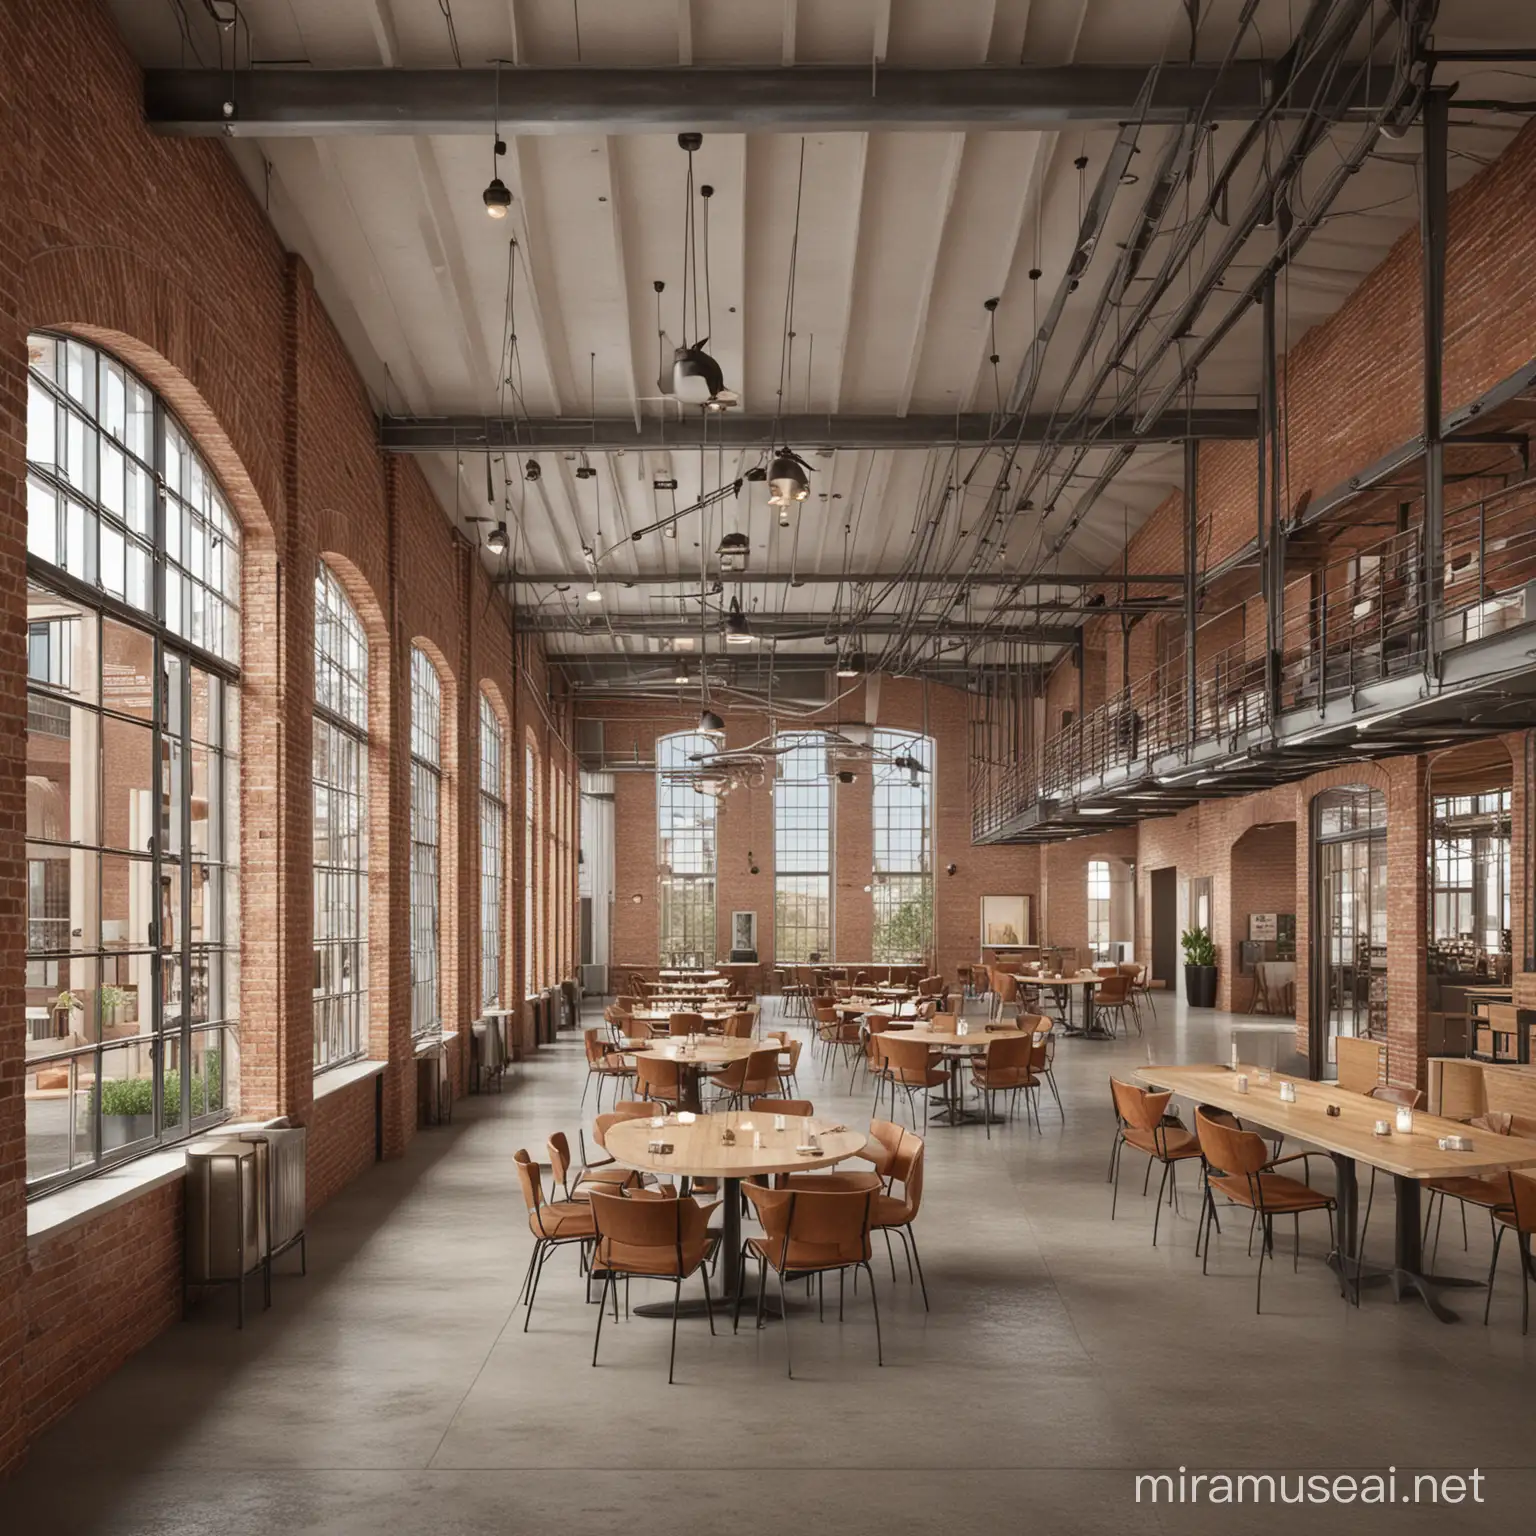 Create an evocative architectural visualization capturing the essence of our adaptive reuse project within the historic Crunden Martin buildings in Gateway South, St. Louis. Focus on a dynamic two-story space that integrates stepped seating for collaborative gatherings and presentations, while also incorporating areas for clients to view prefabricated components up close. Infuse the scene with a sense of modernity juxtaposed with the building's historical charm, showcasing the seamless fusion of past and present in our design vision.